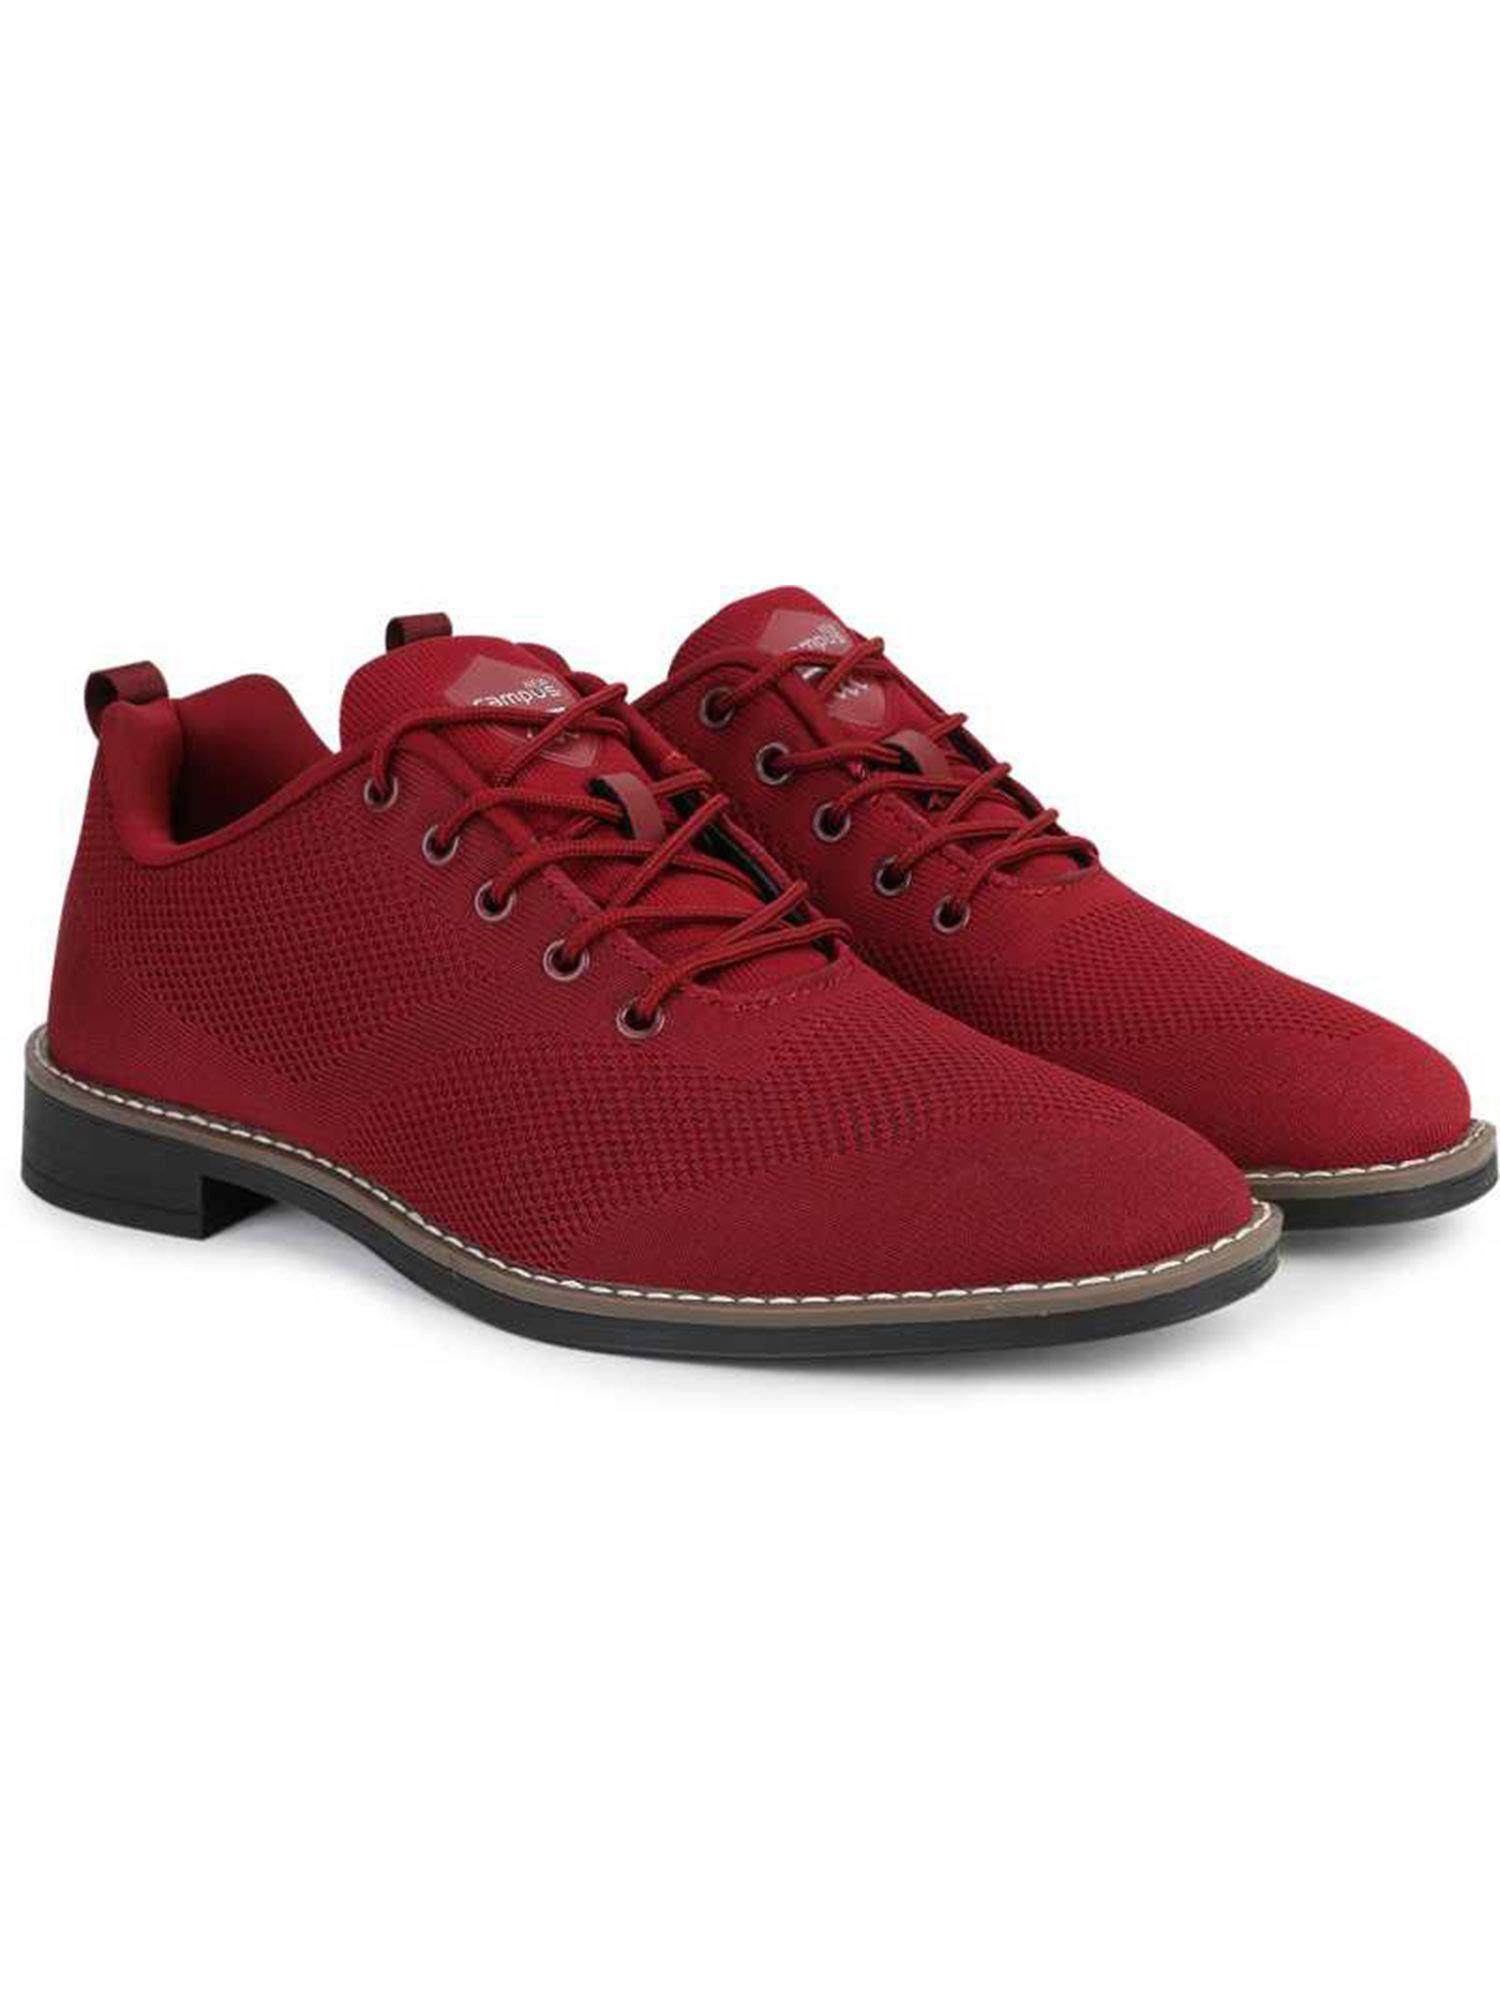 classy-burgundy-casual-shoes-for-men